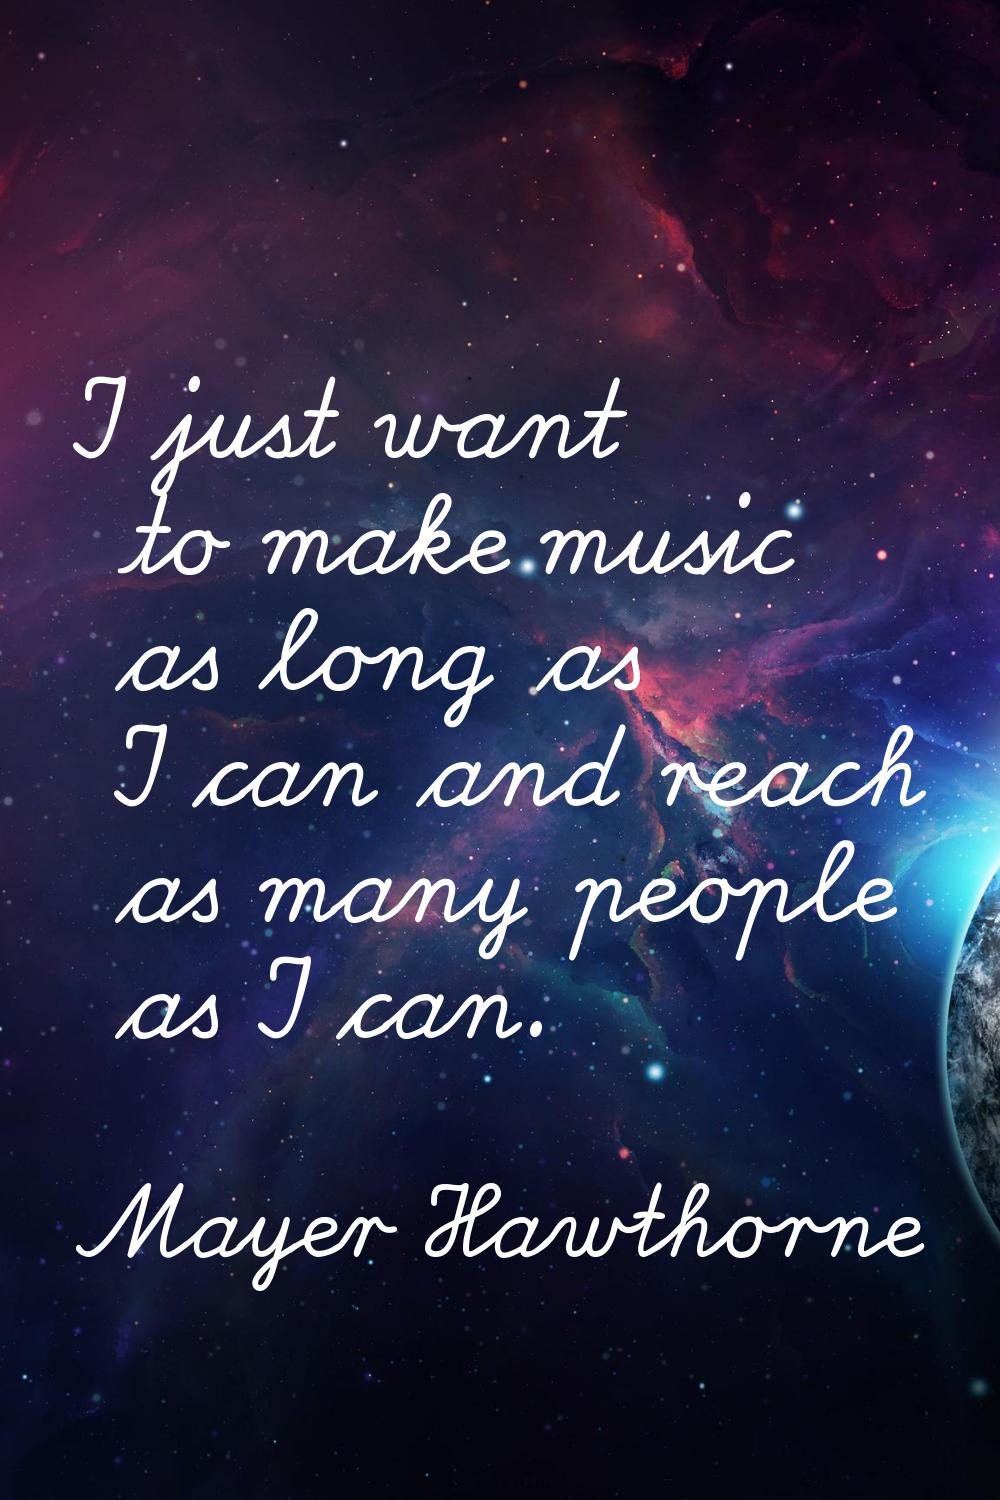 I just want to make music as long as I can and reach as many people as I can.